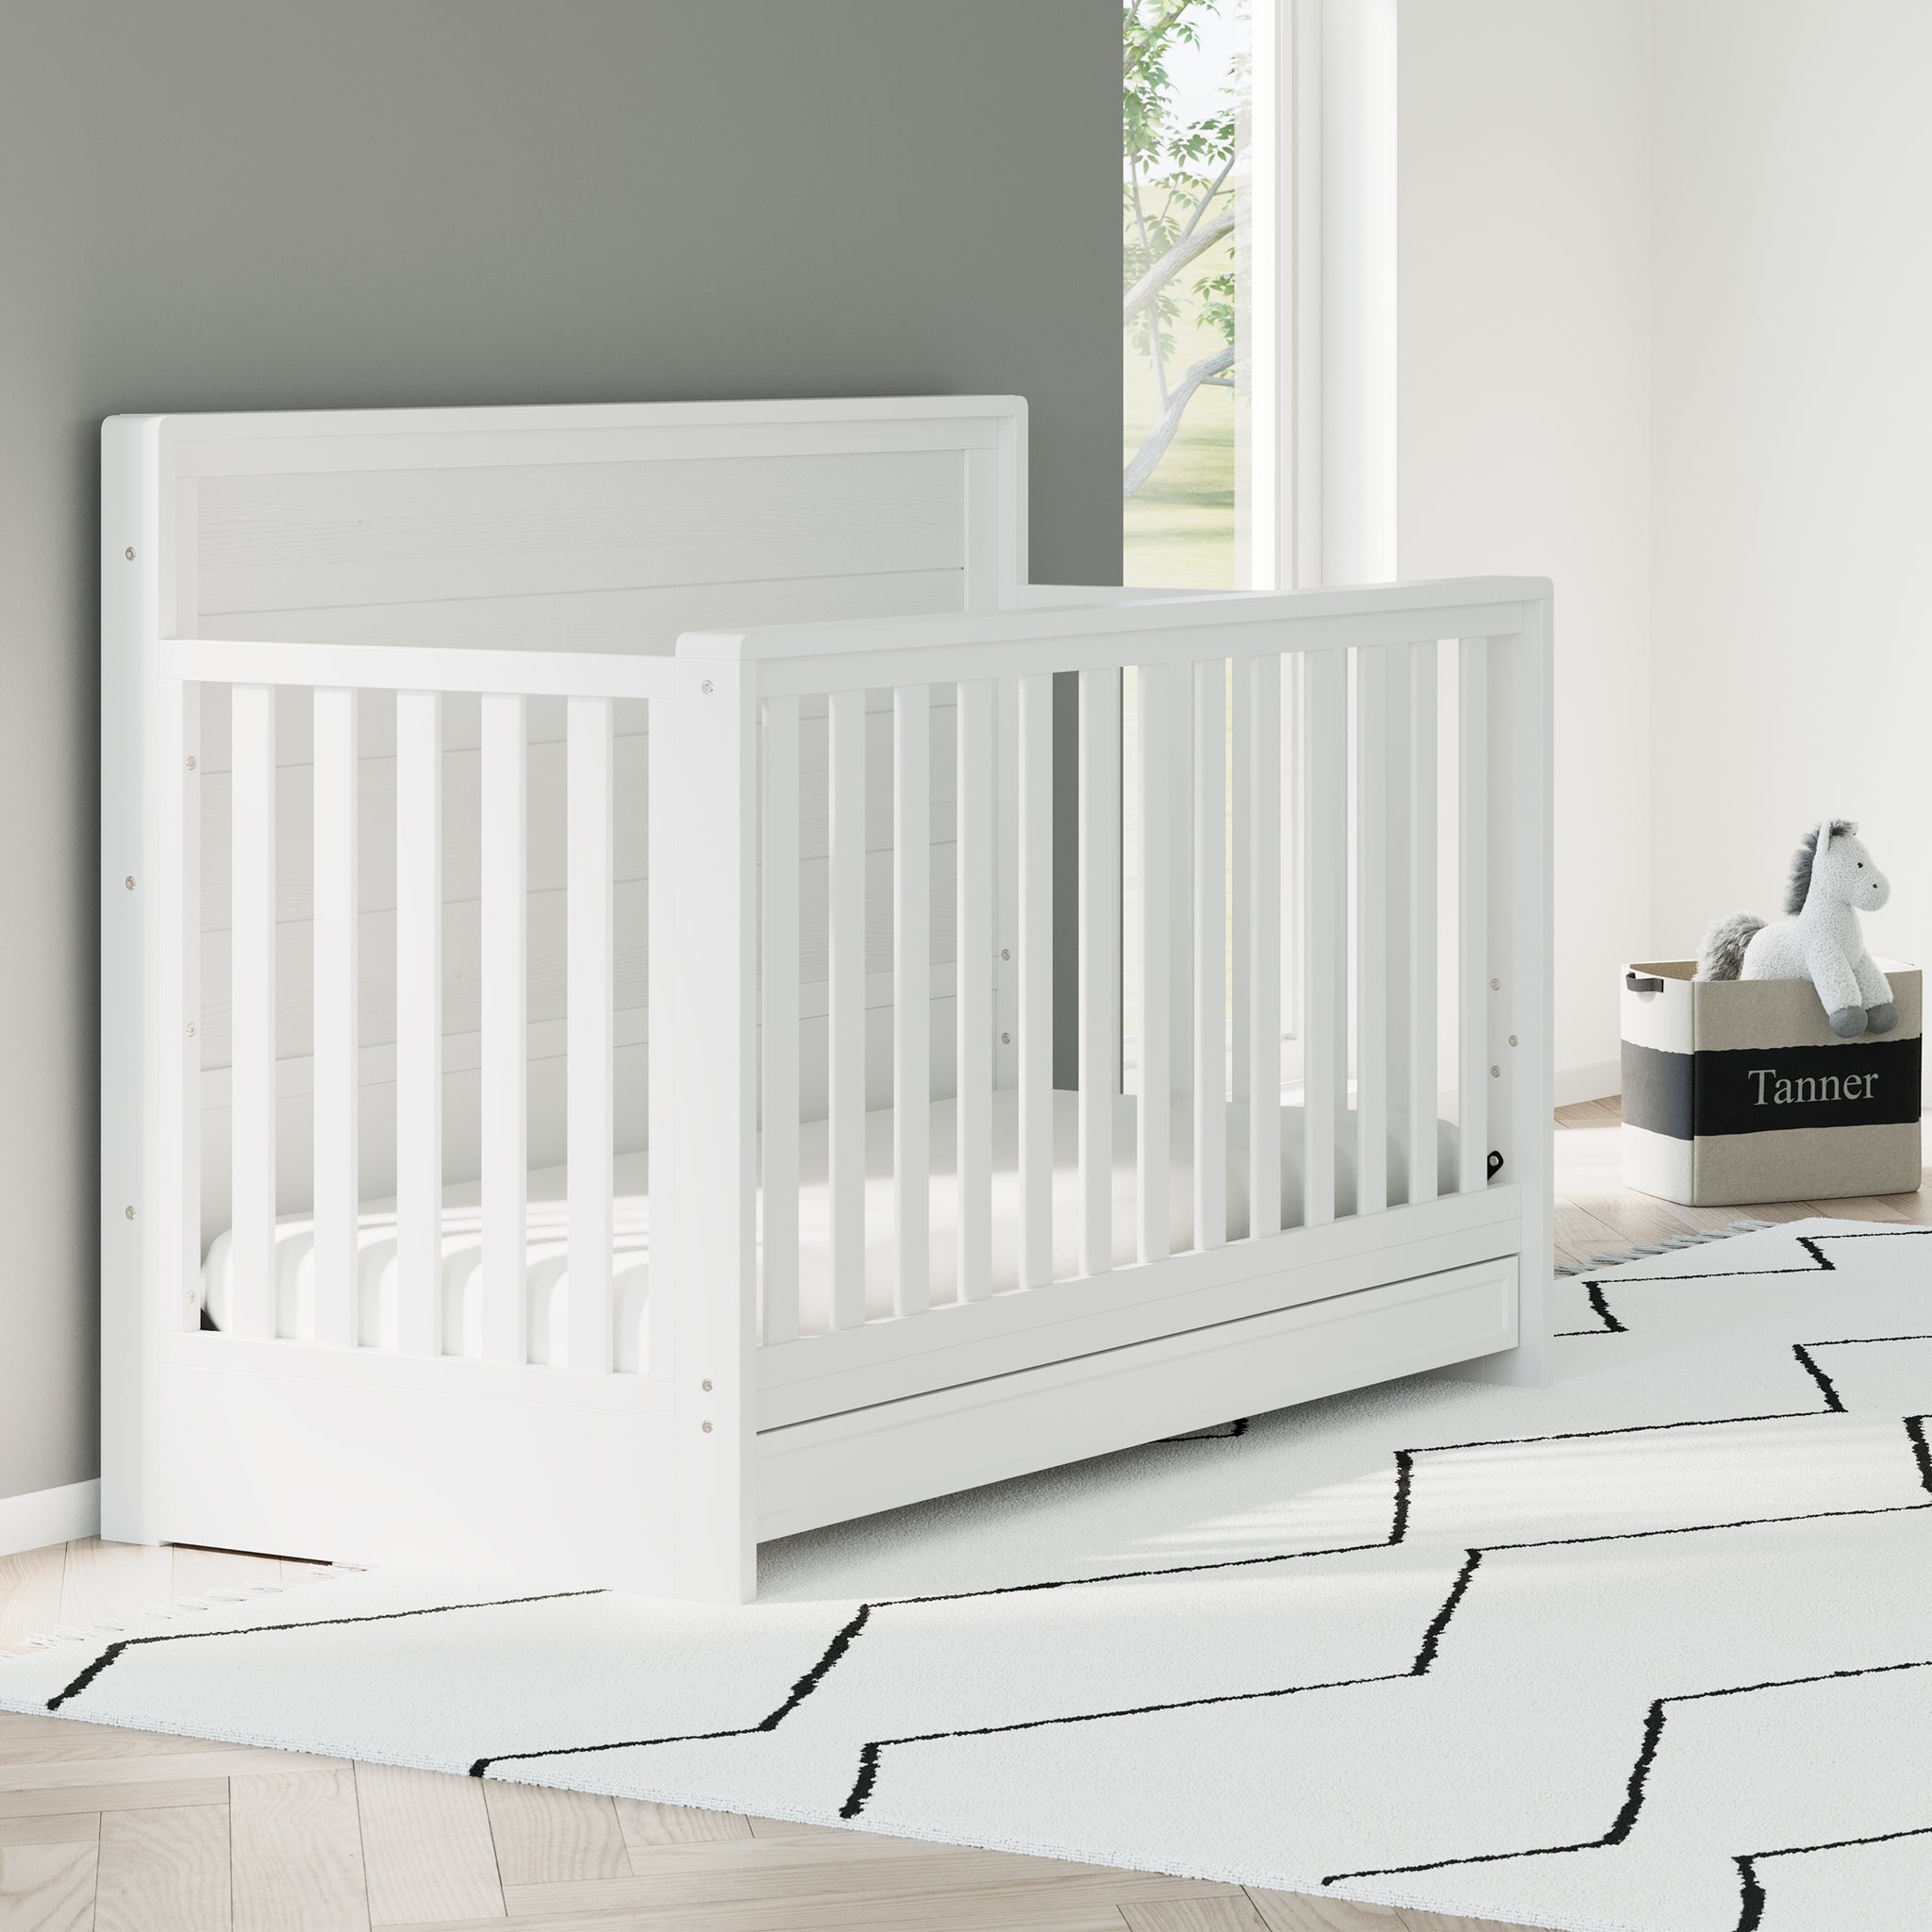 White crib with drawer angled in nursery